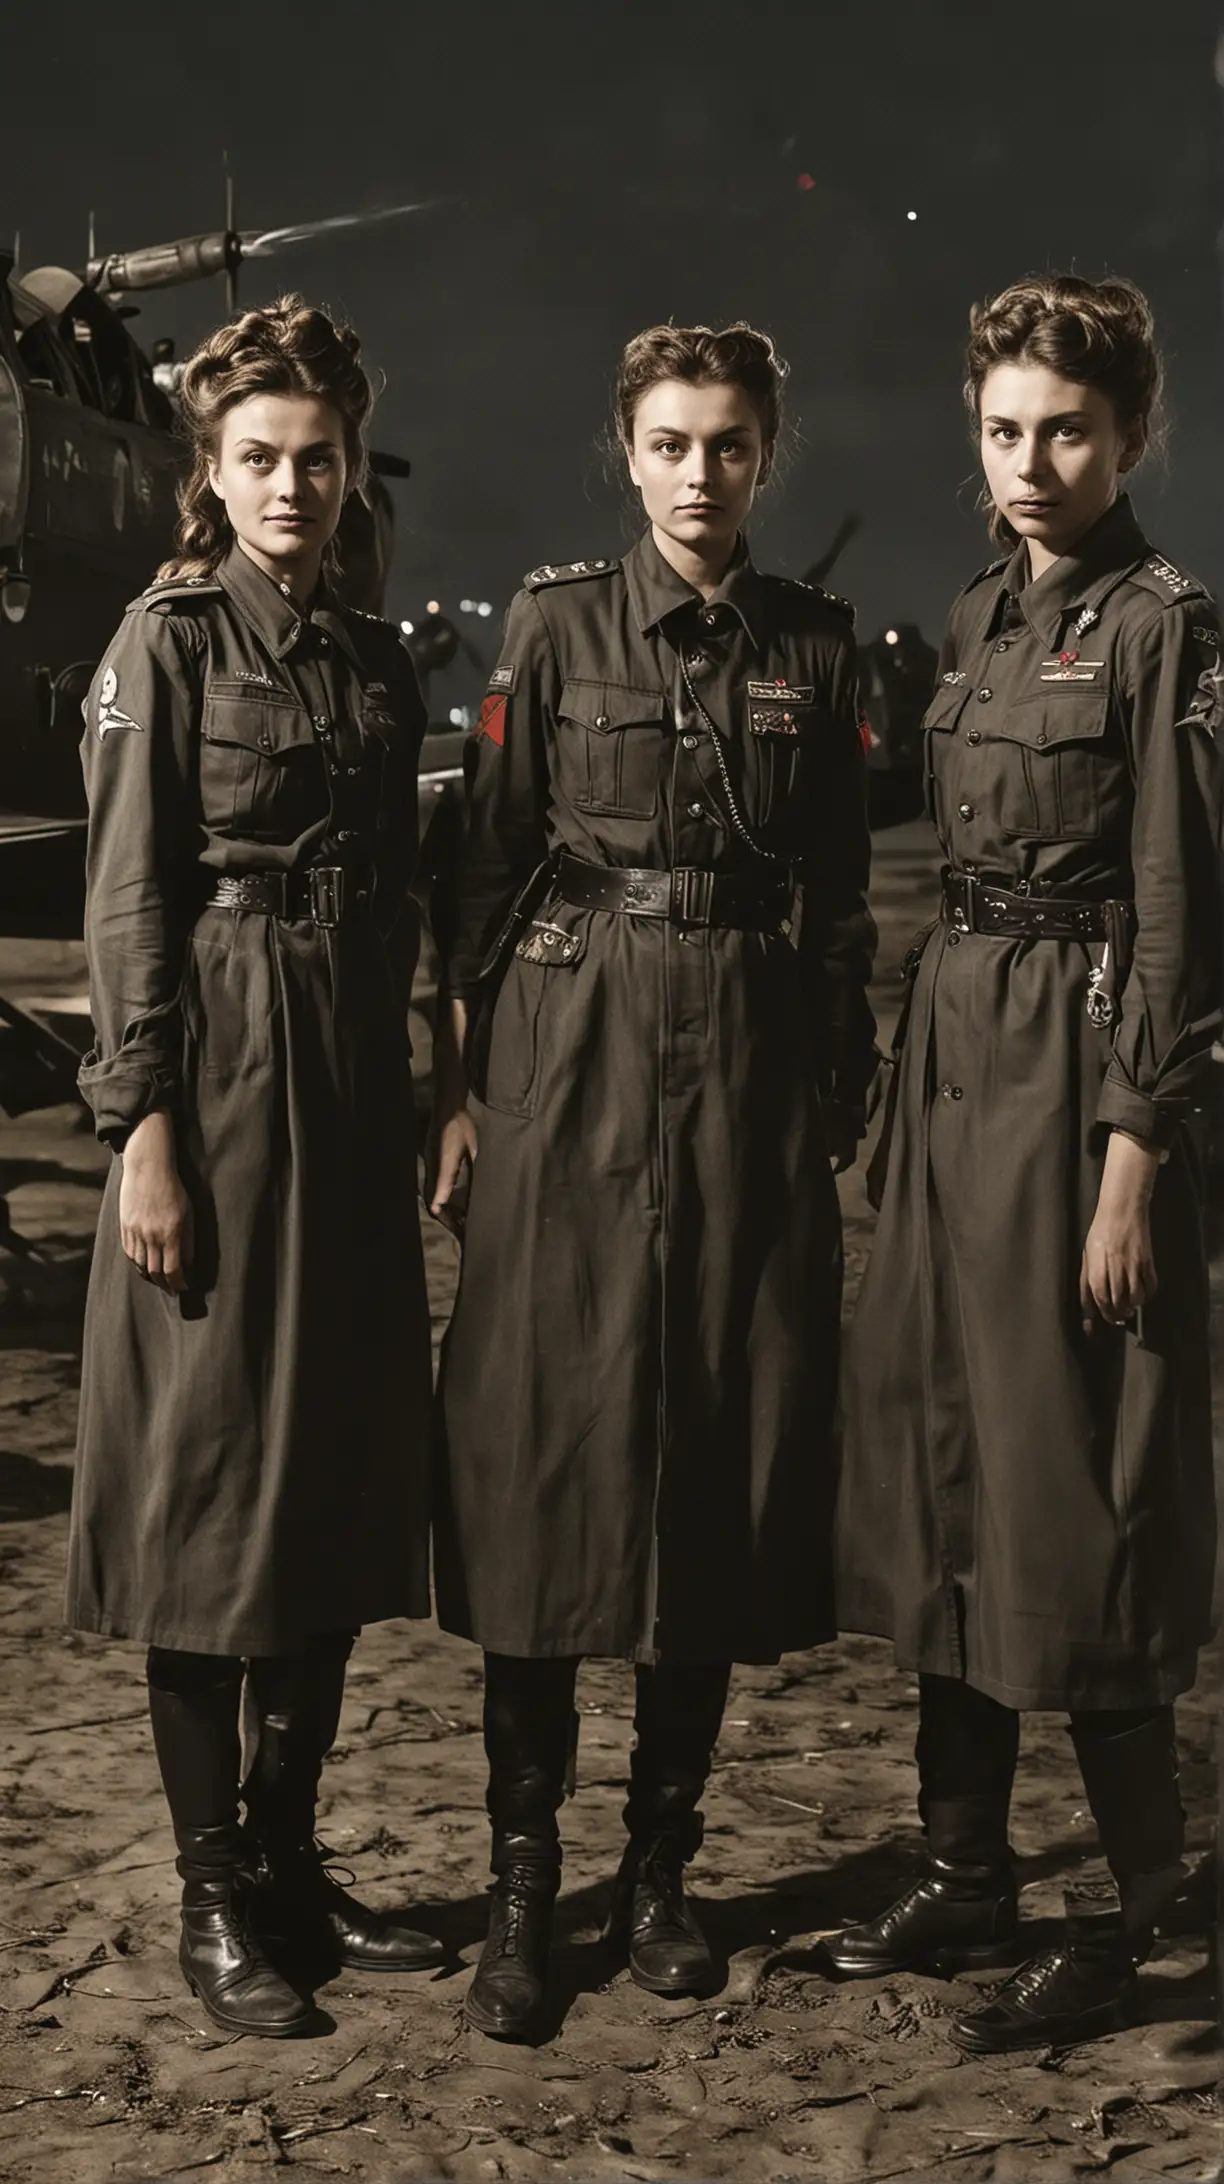 Night Witches Preparing for a Mission